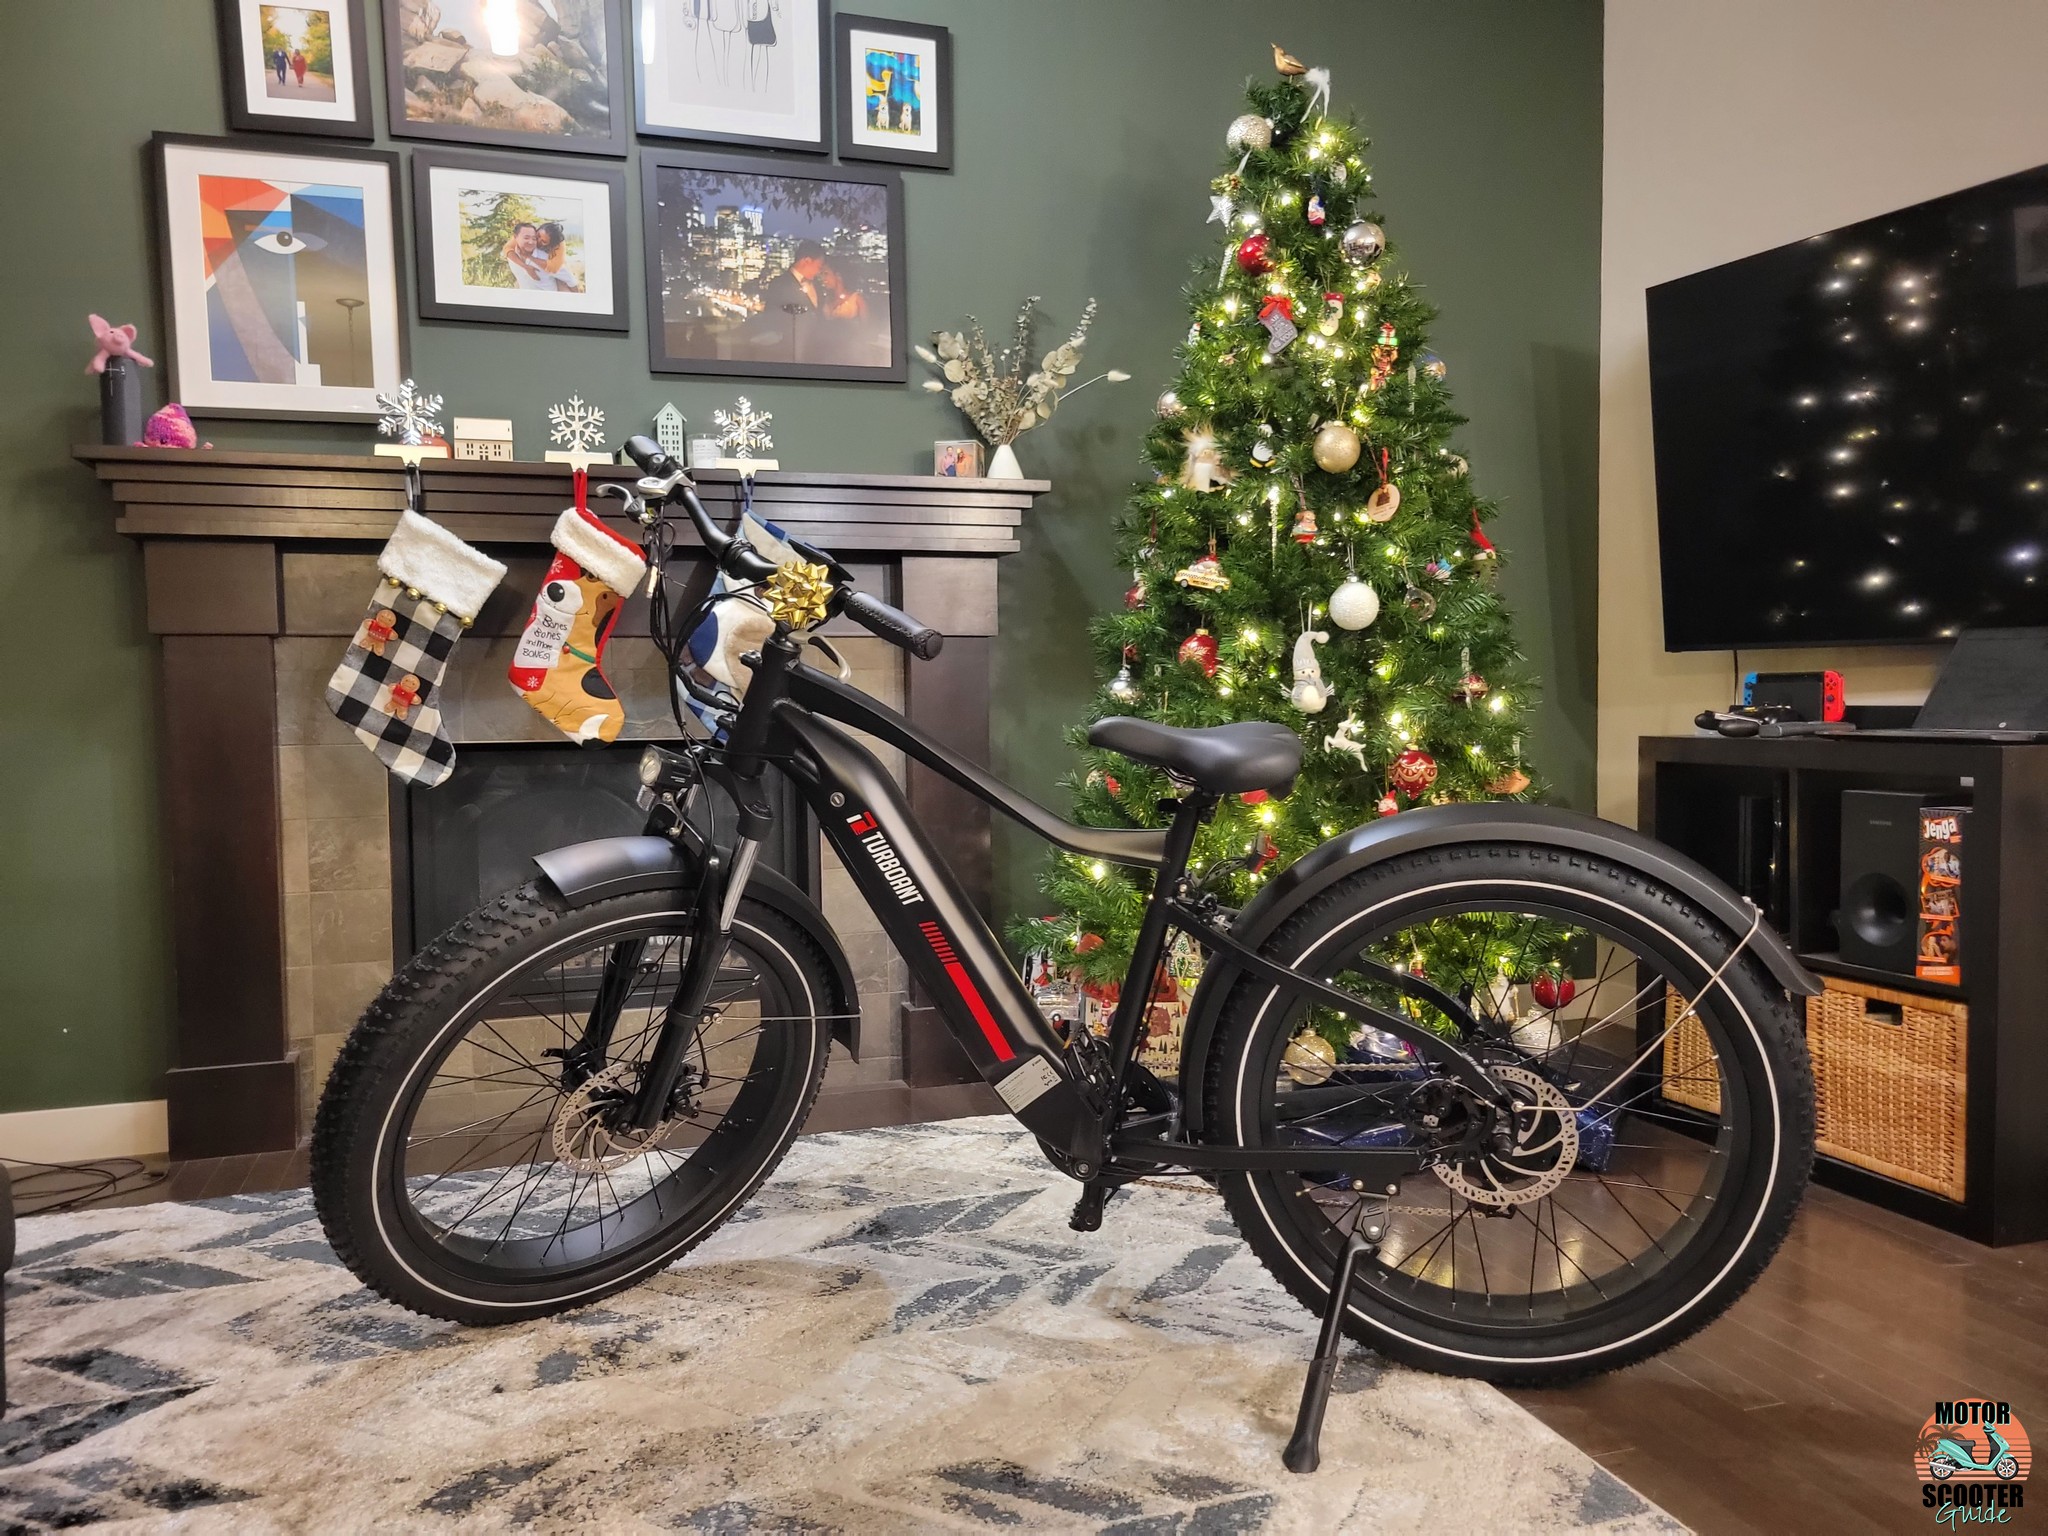 An assembled Nebula N1 ebike in front of Christmas tree